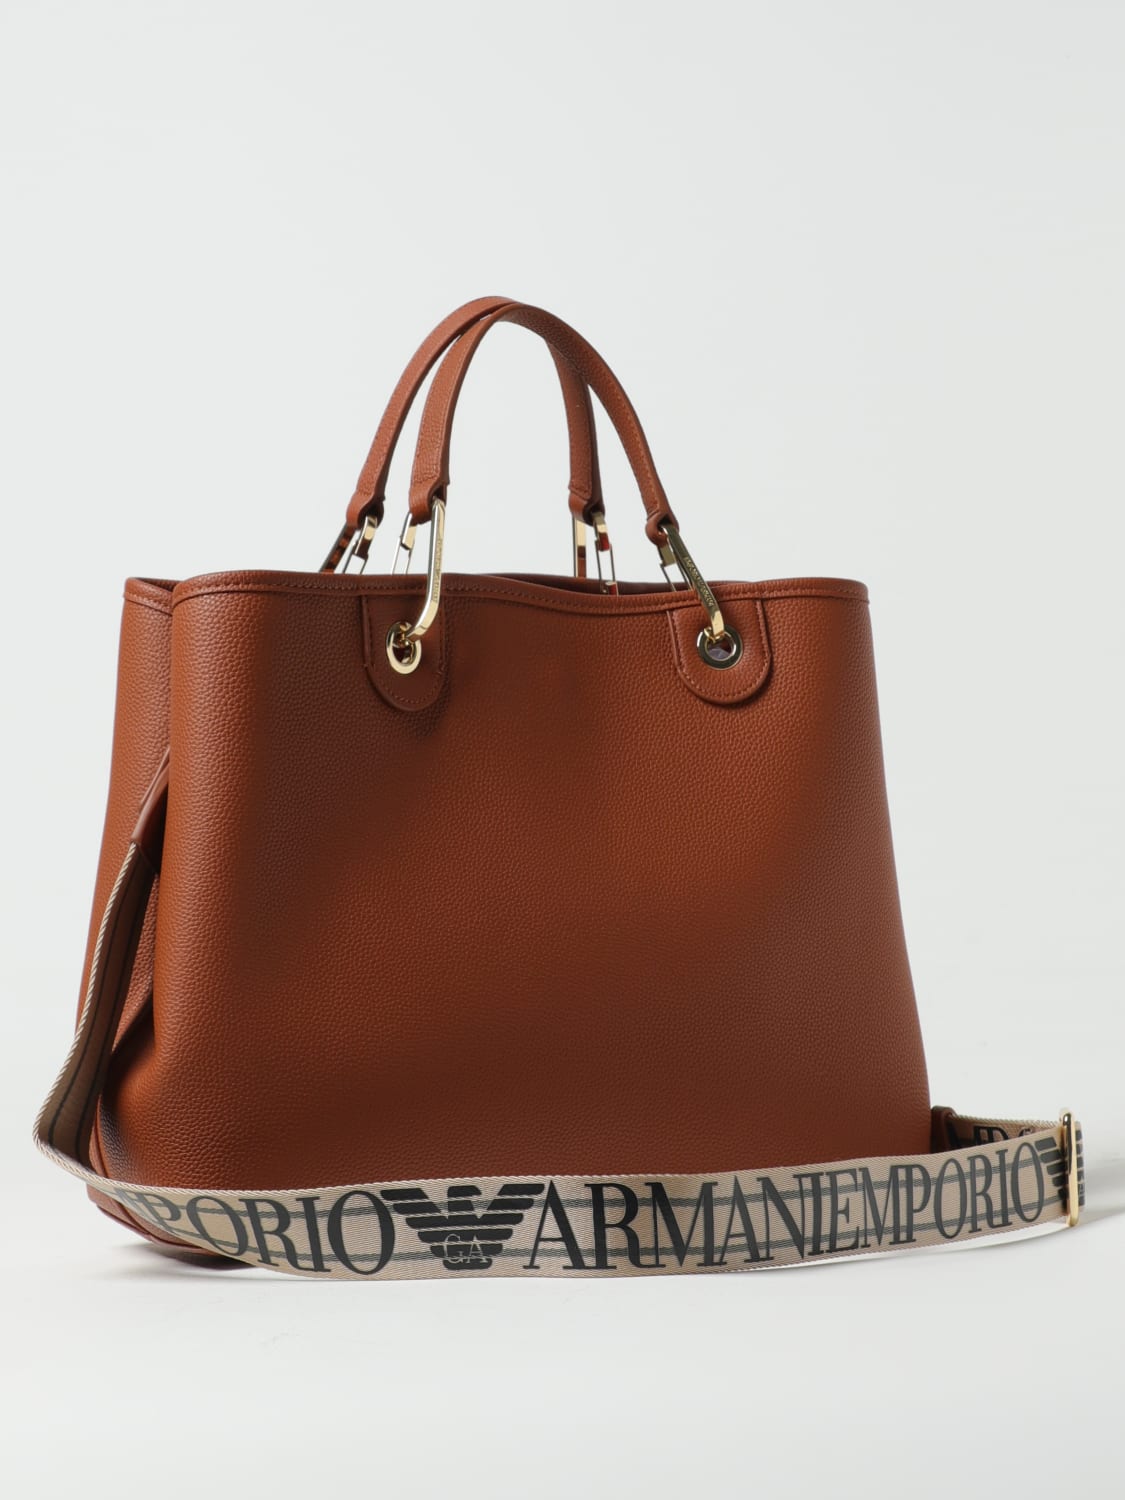 Emporio Armani Bag in Grained Synthetic Leather